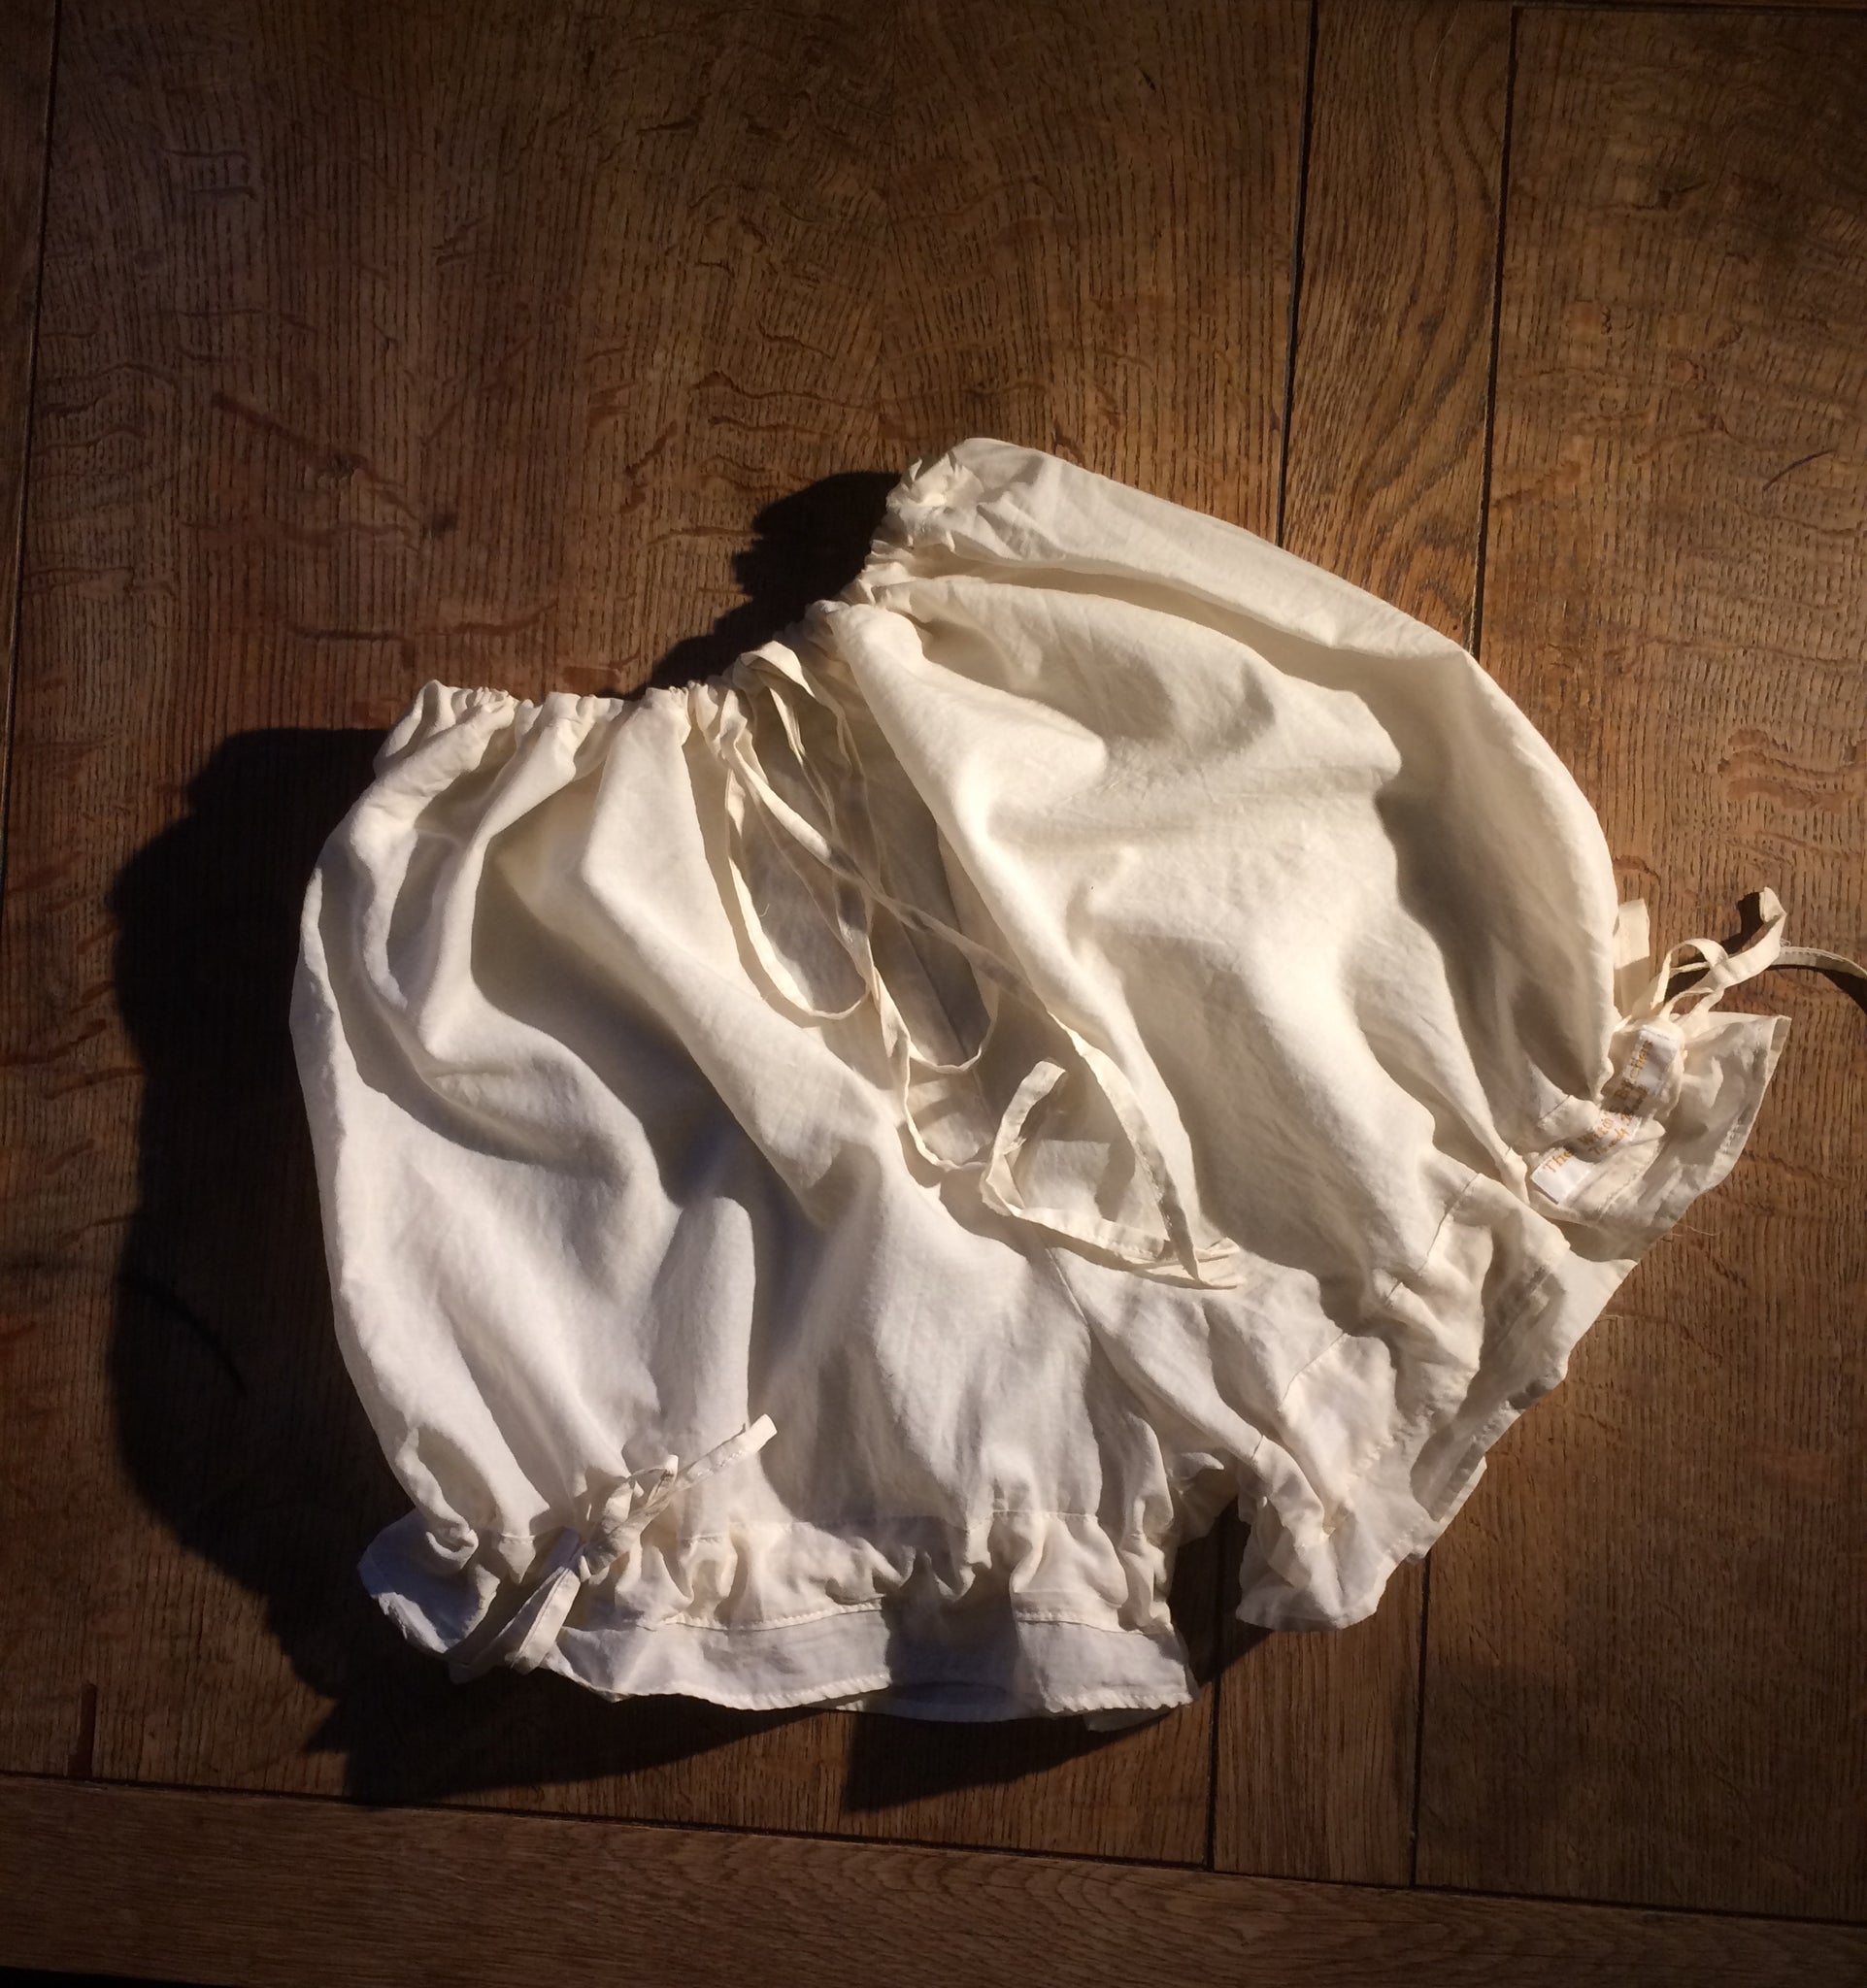 Unbleached organic cotton batiste bloomers (46”)